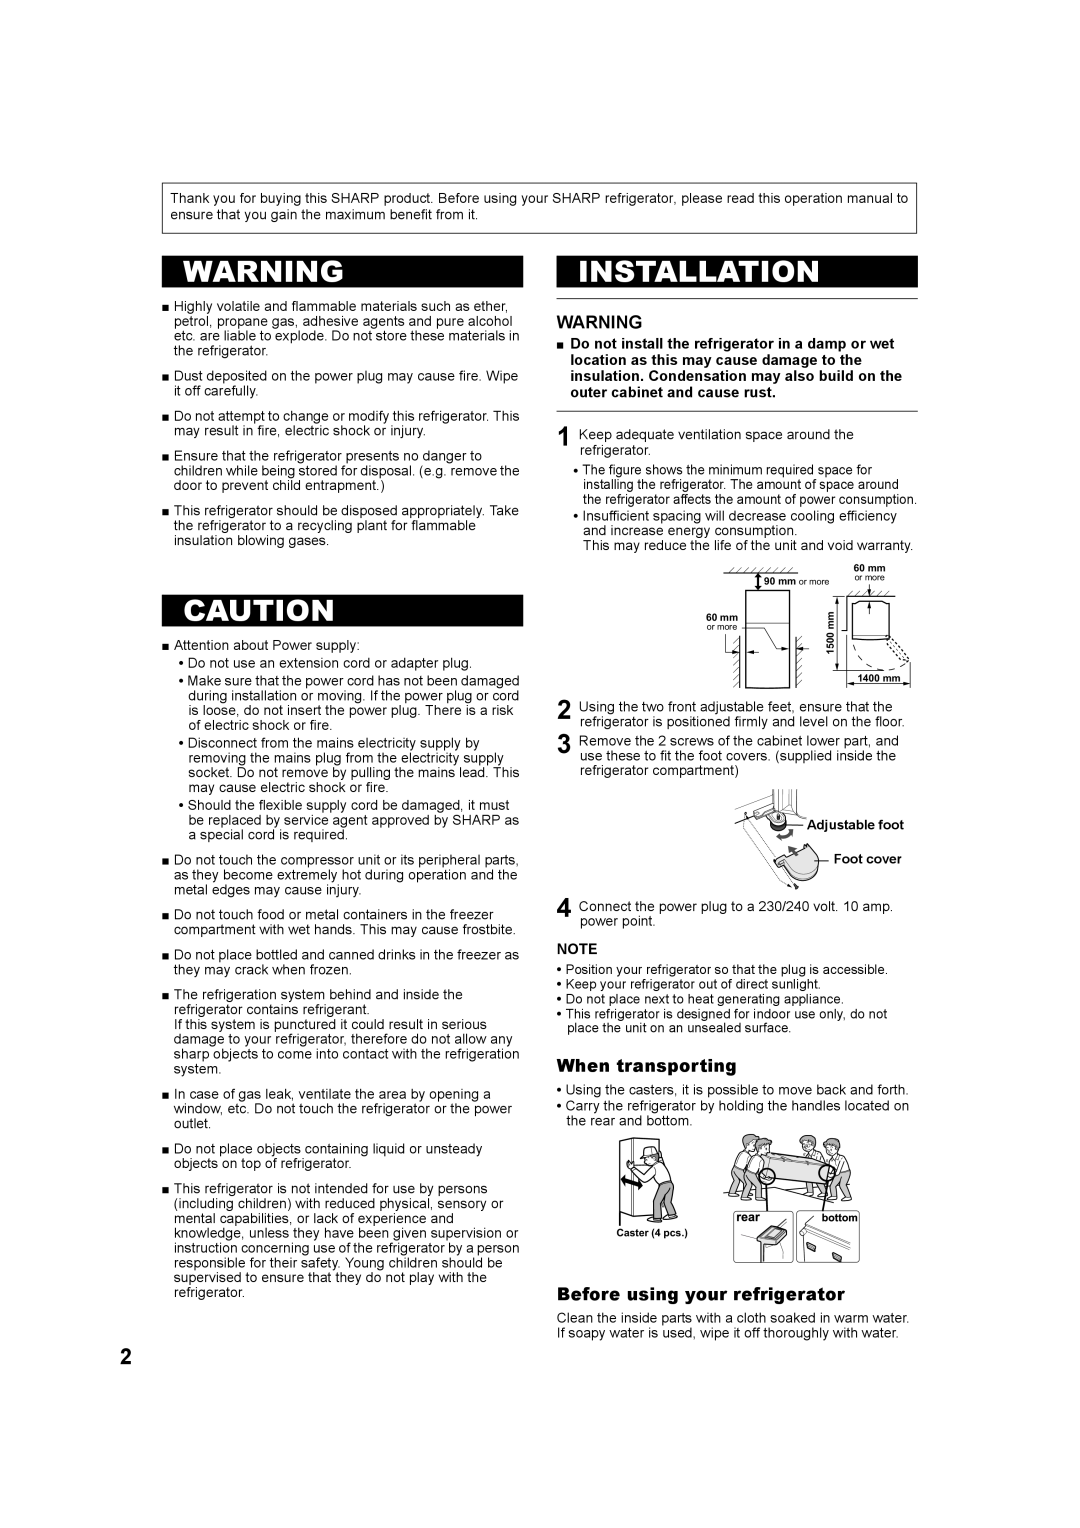 Sharp SJ-TD555S operation manual Installation, When transporting, Before using your refrigerator 